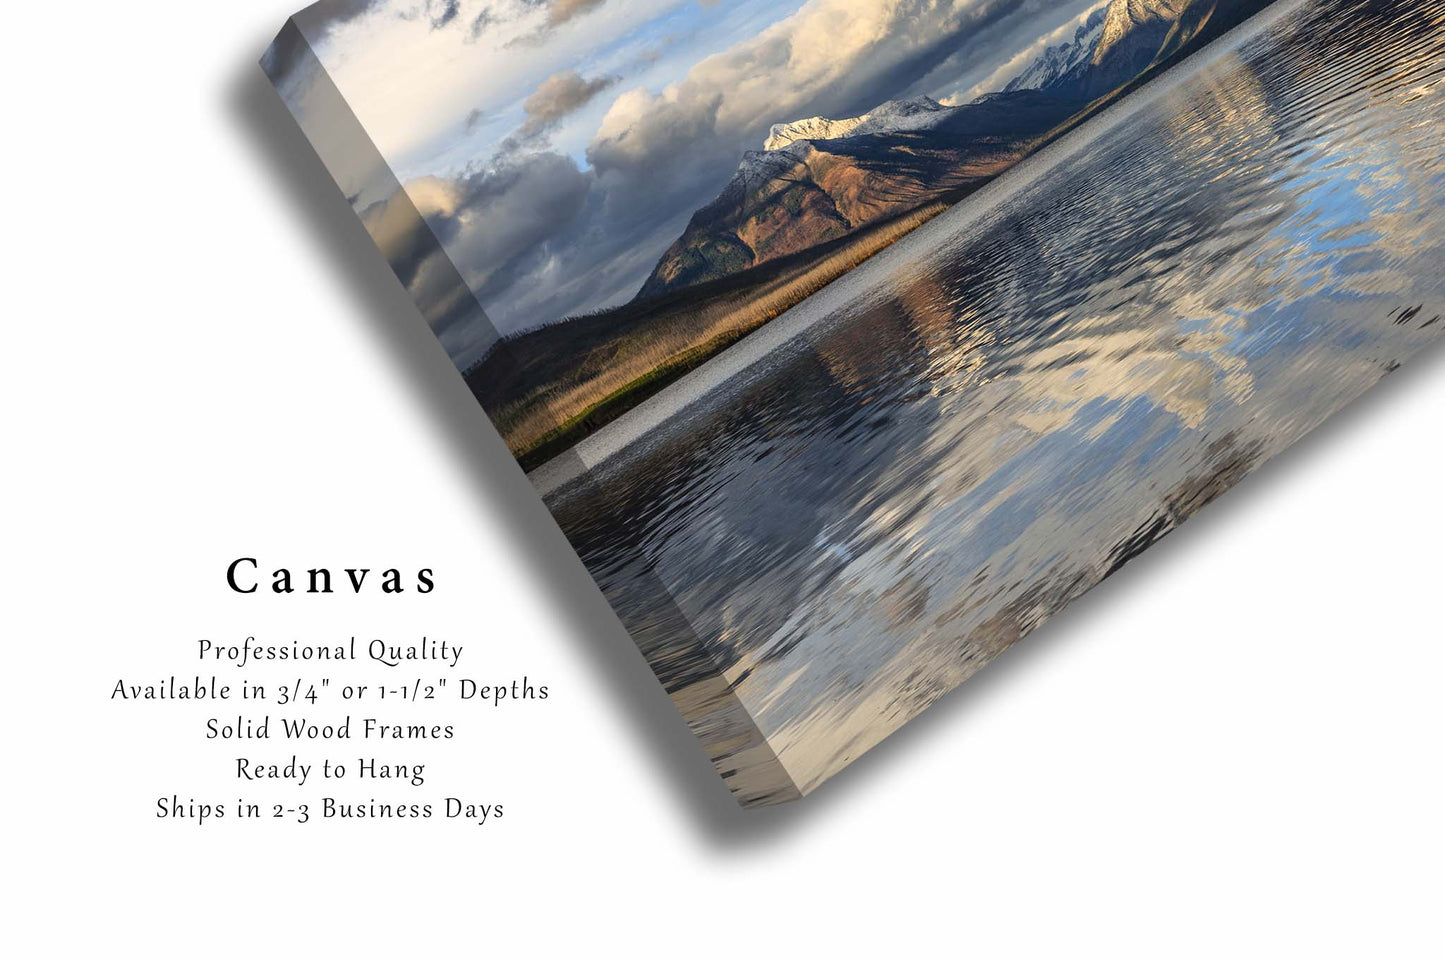 Glacier National Park Canvas Wall Art (Ready to Hang) Gallery Wrap of Snowy Peaks at Lake McDonald on Autumn Day in Montana Rocky Mountain Photography Nature Decor